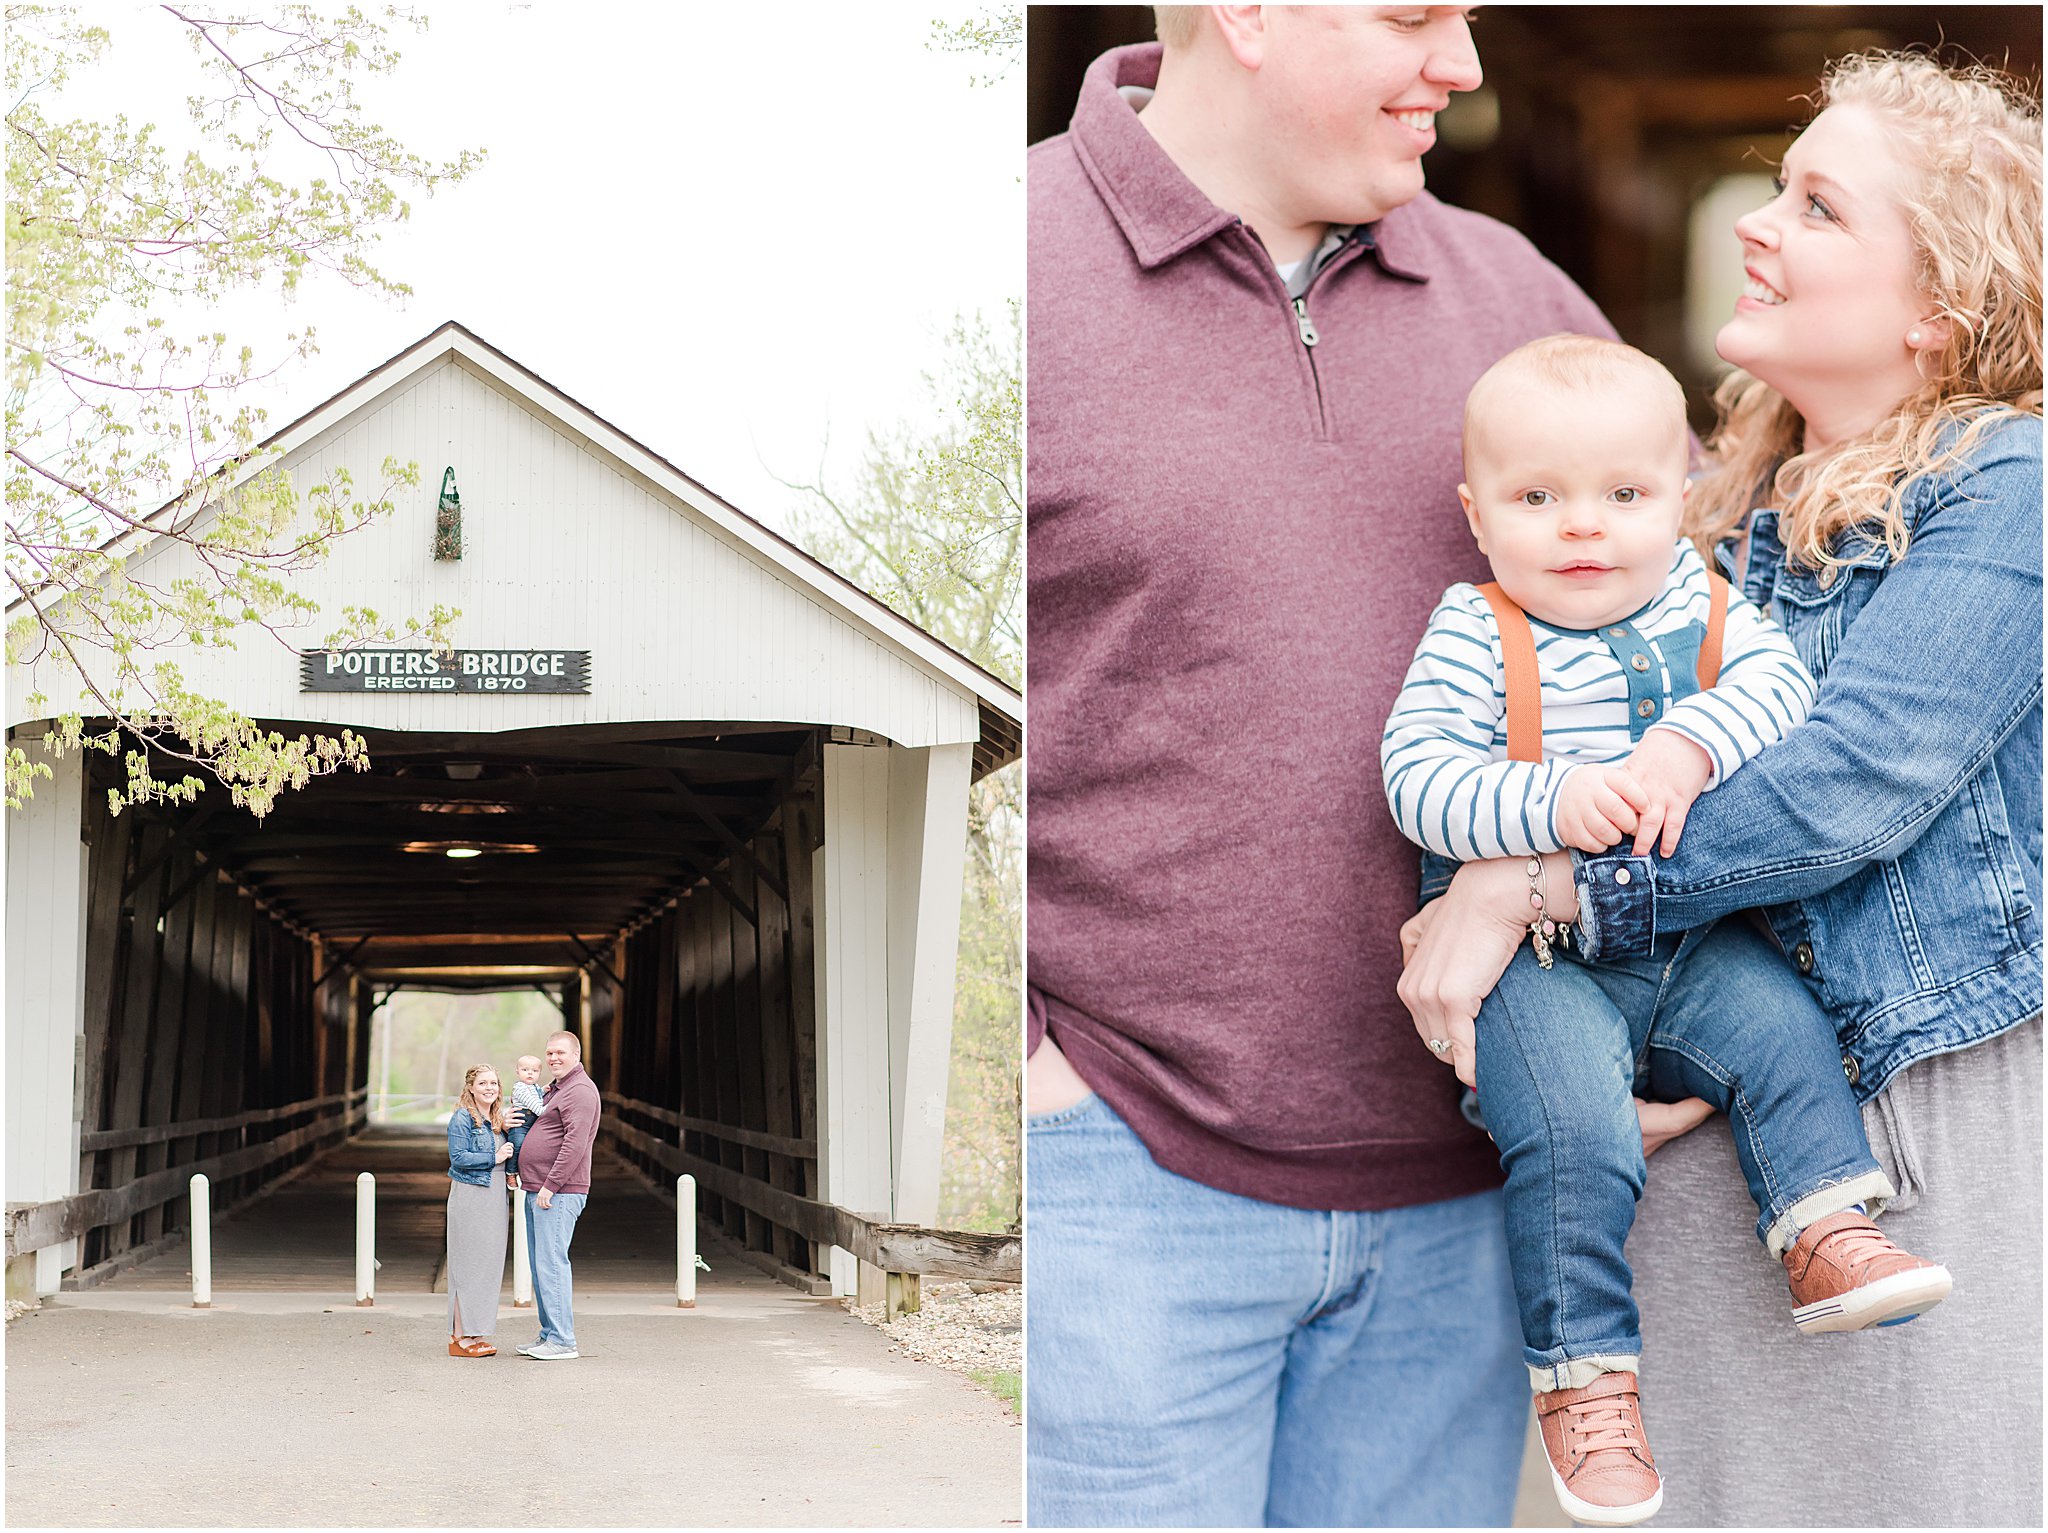 Mom, Dad and baby standing in front of covered bridge at Potter's Bridge Park